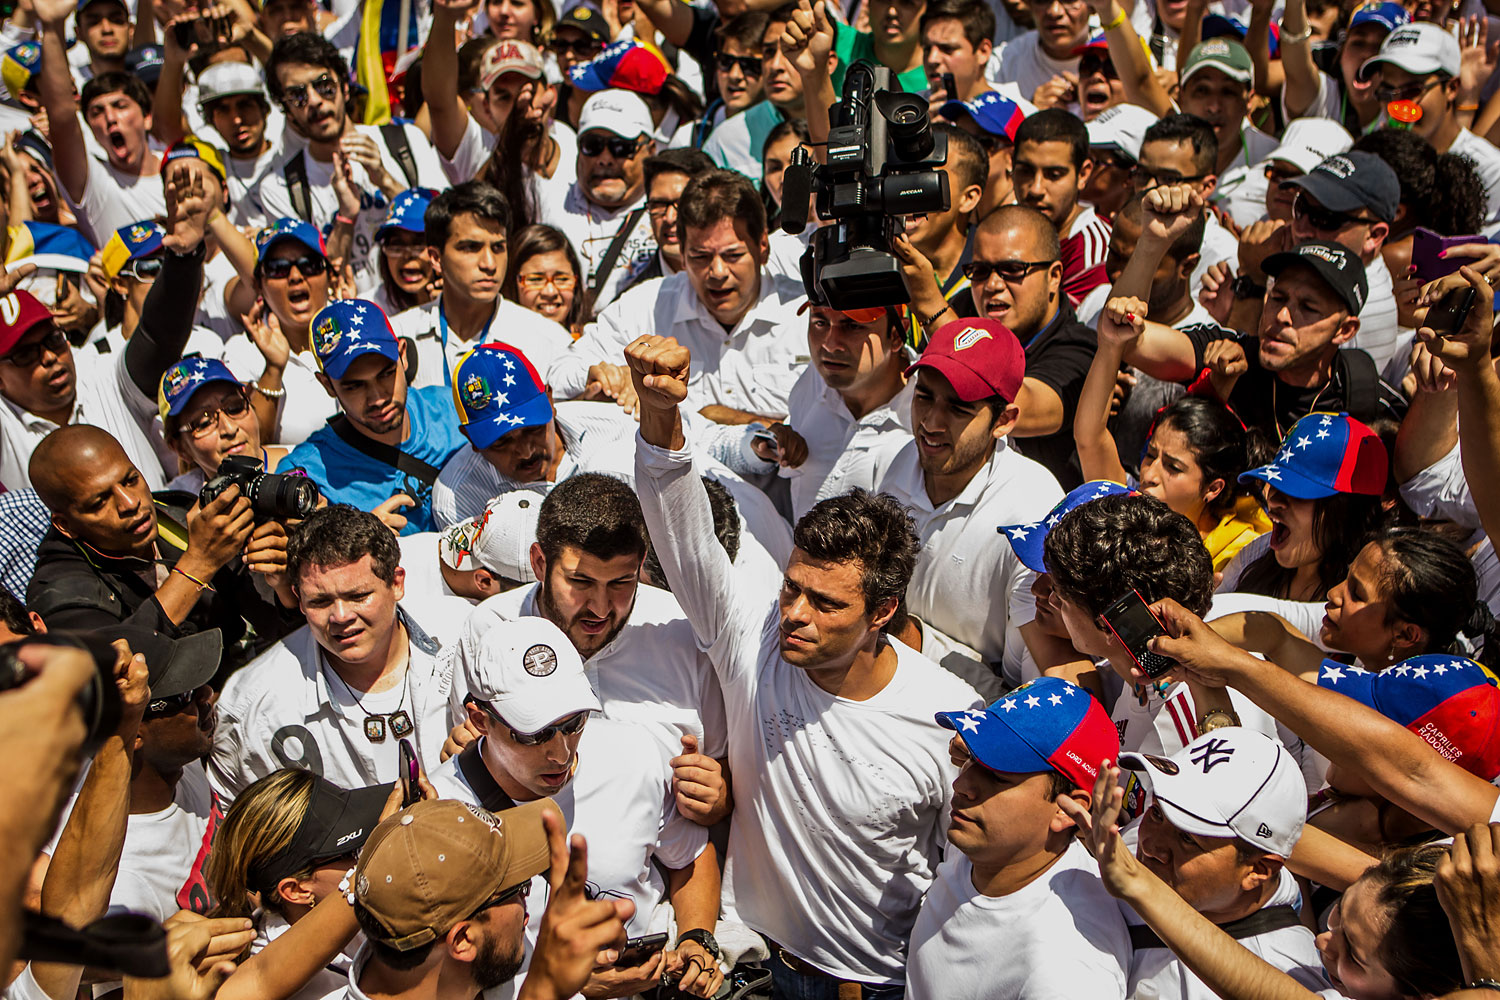 Opposition leader Leopoldo López arrives to the march in a swarm of supporters, Feb. 18, 2014. Thousands of people took to the streets today to support López as he surrendered to police during a peaceful march in Caracas.